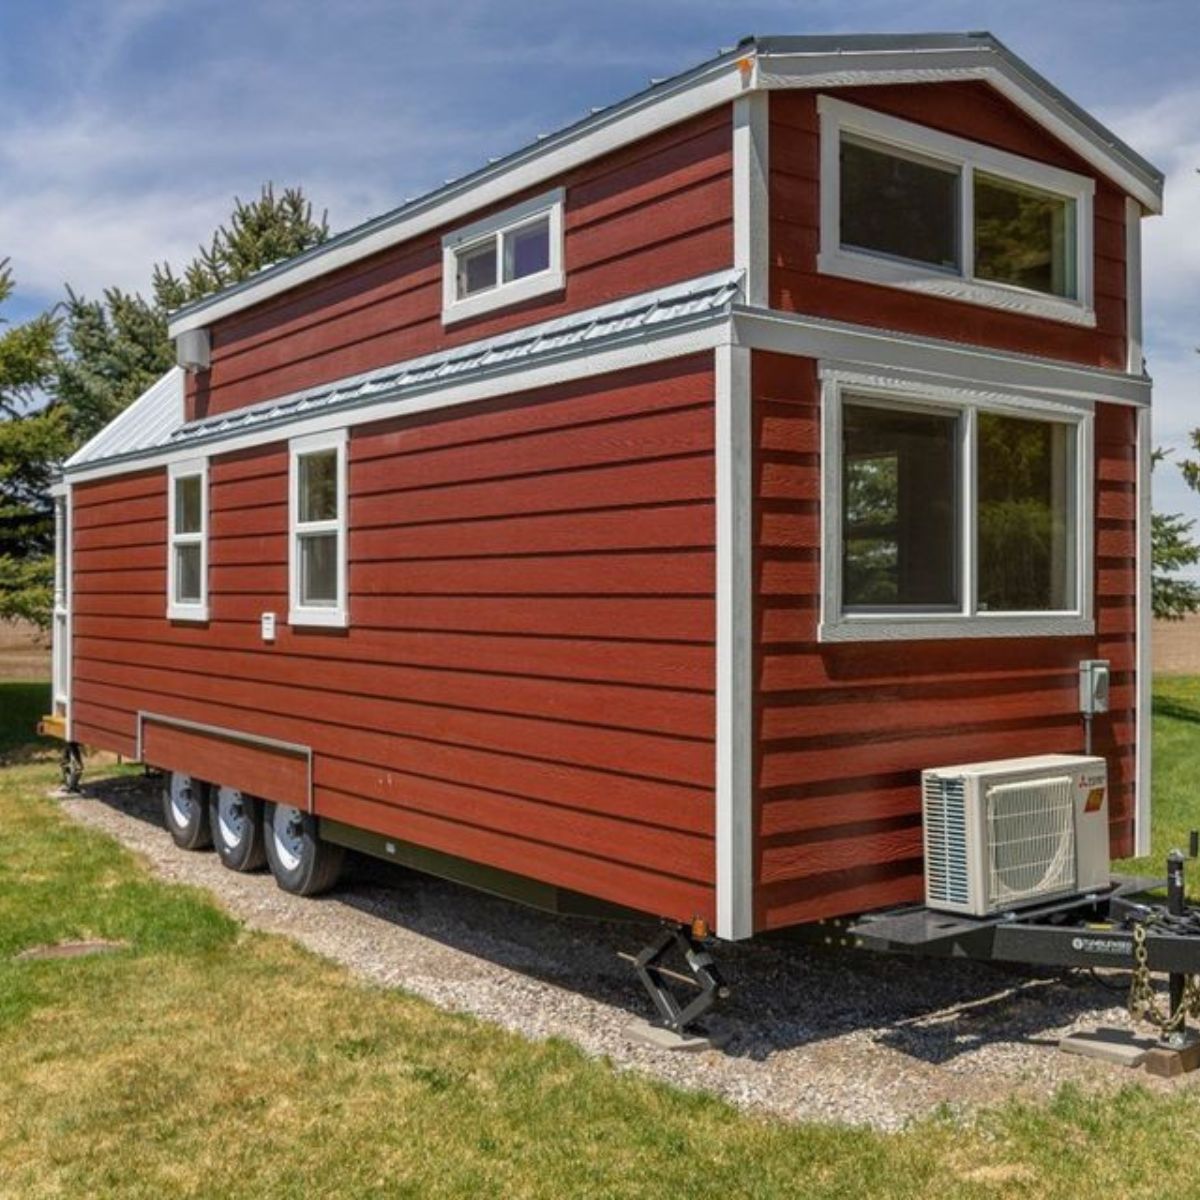 red and white colored exterior walls of 2 Bedroom Tiny House